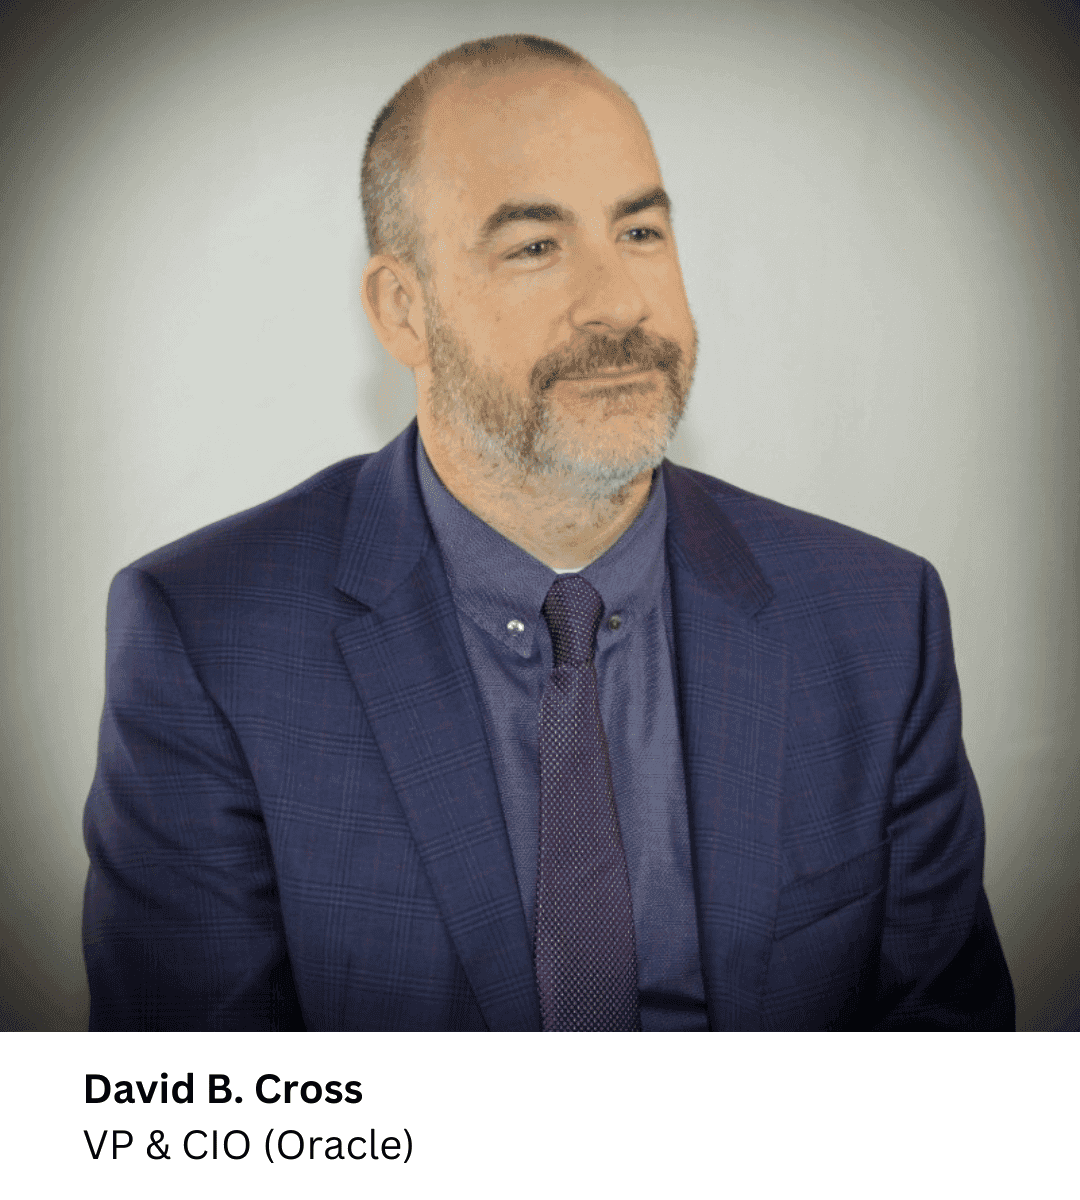 Picture of David B Cross who is CIO at Oracle